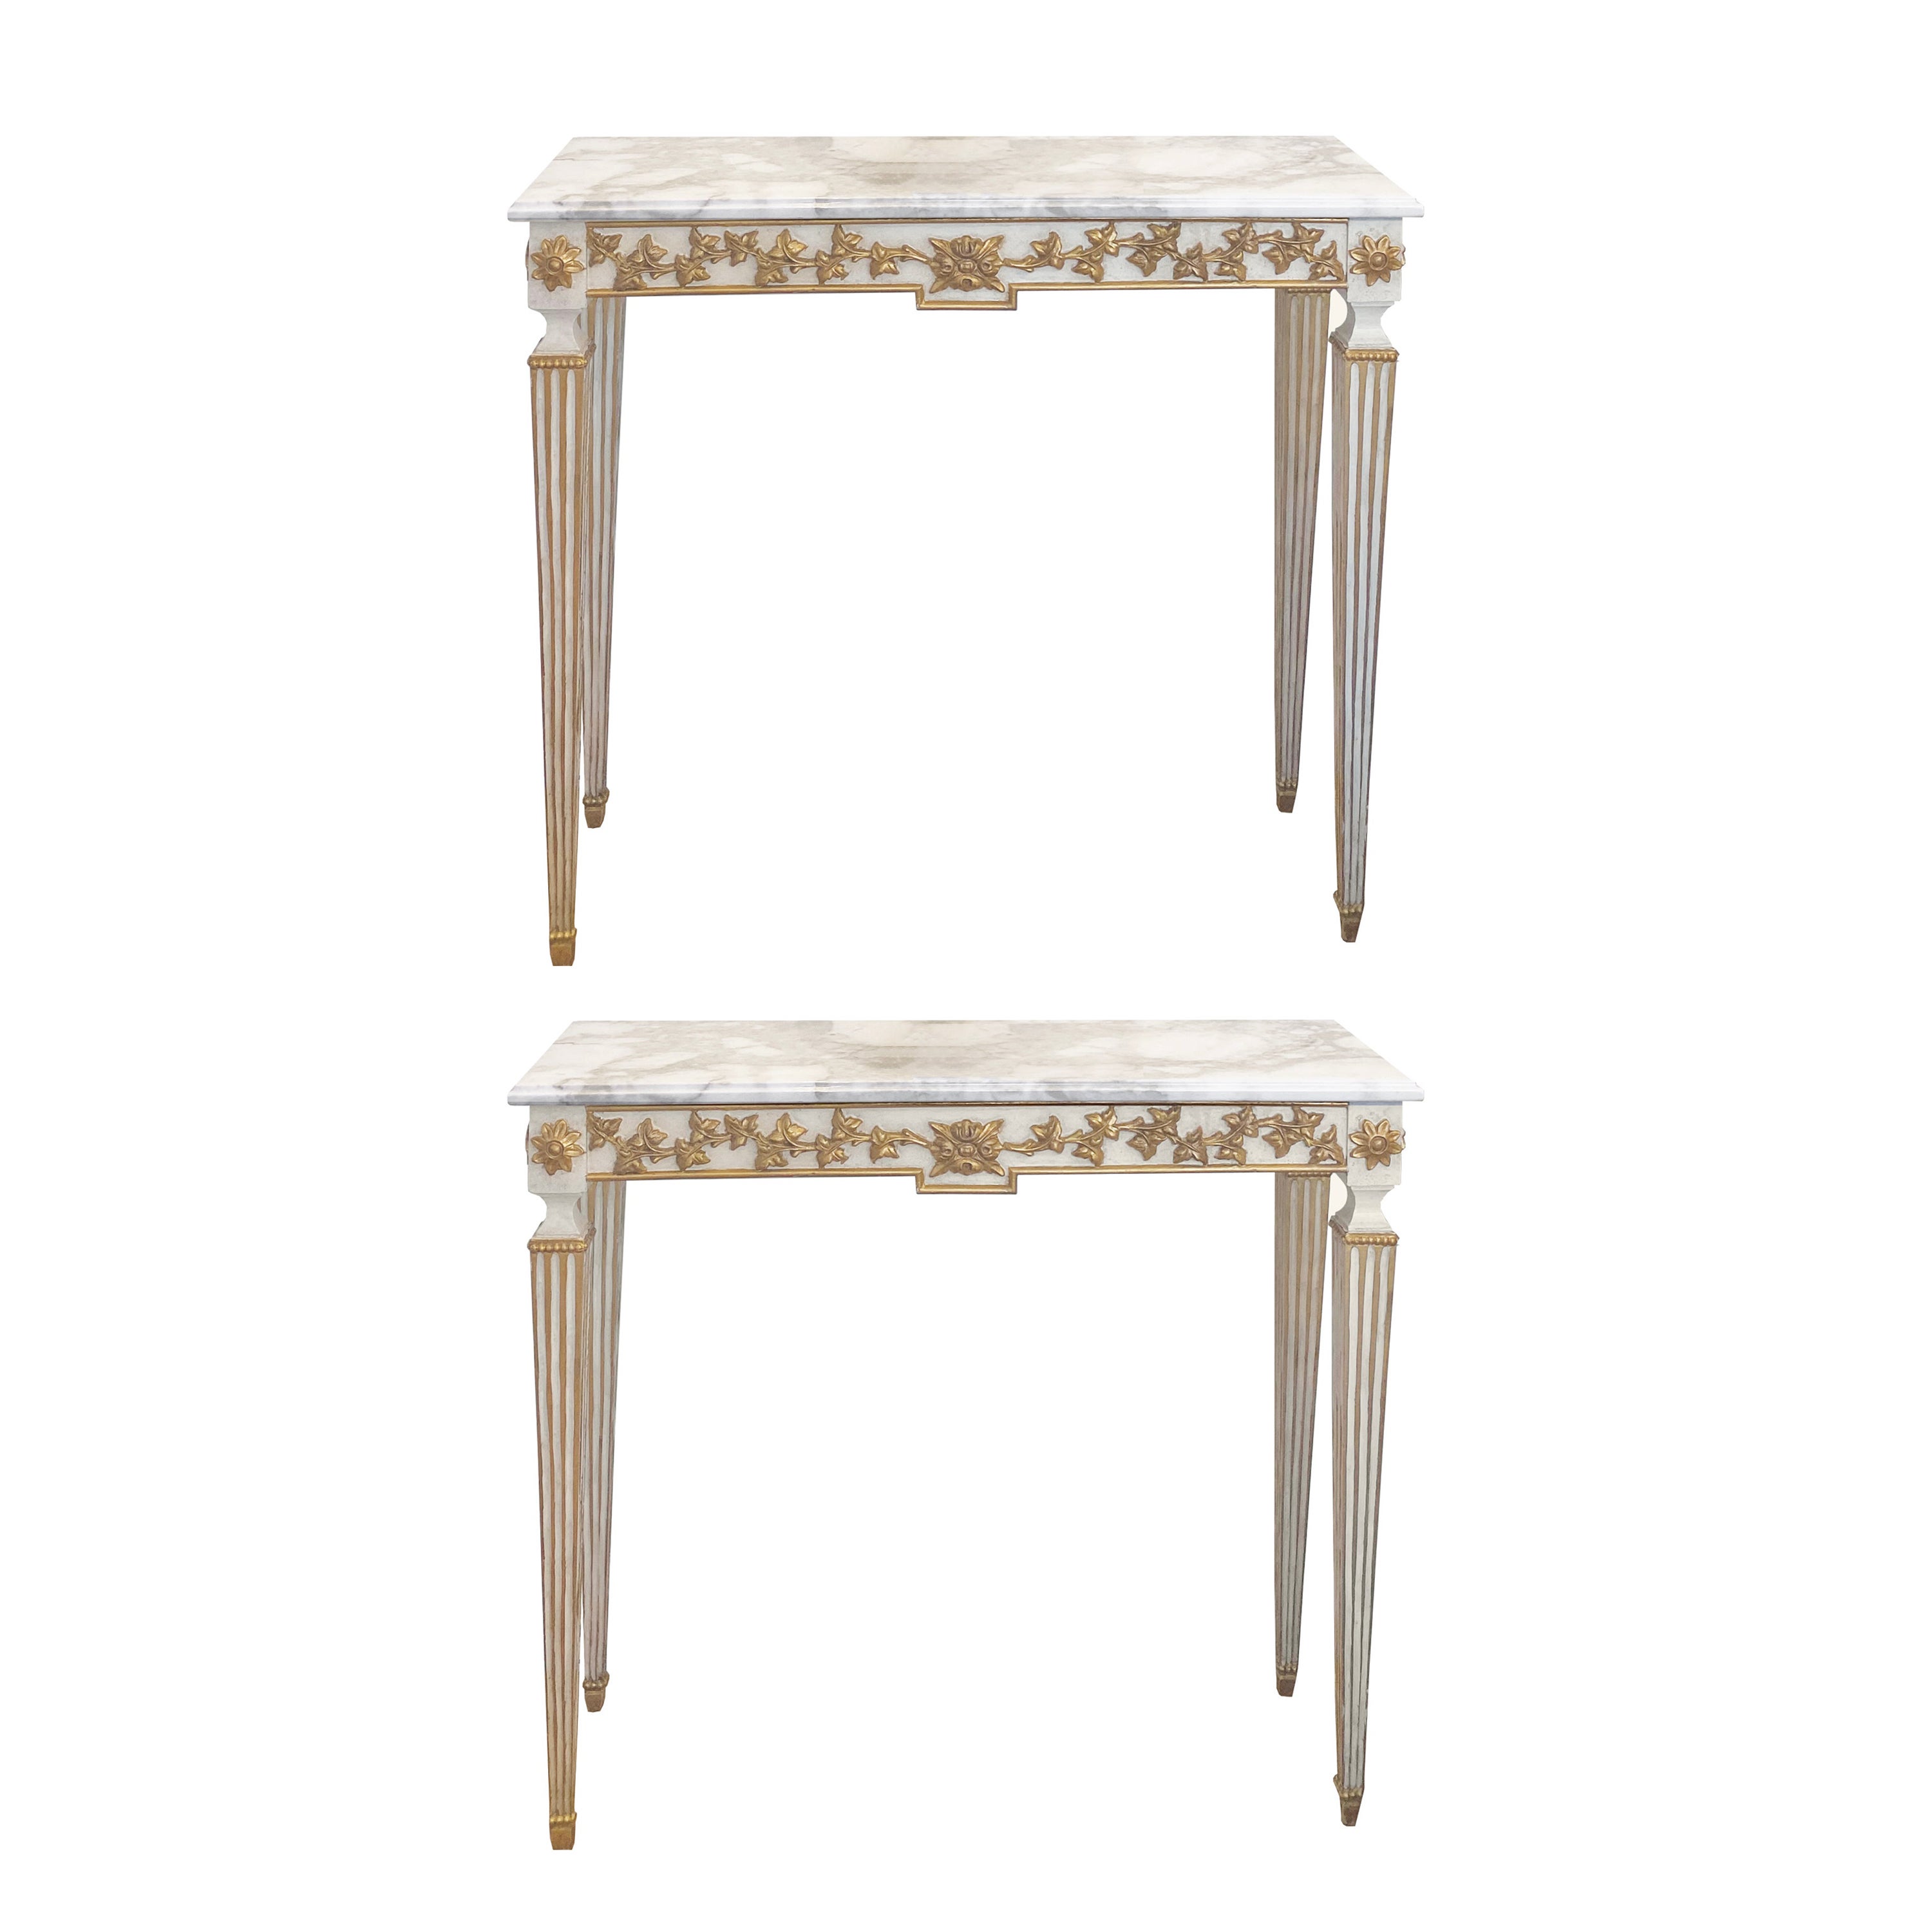 Pair of Neoclassical Italian Gilt and Marble Console Tables